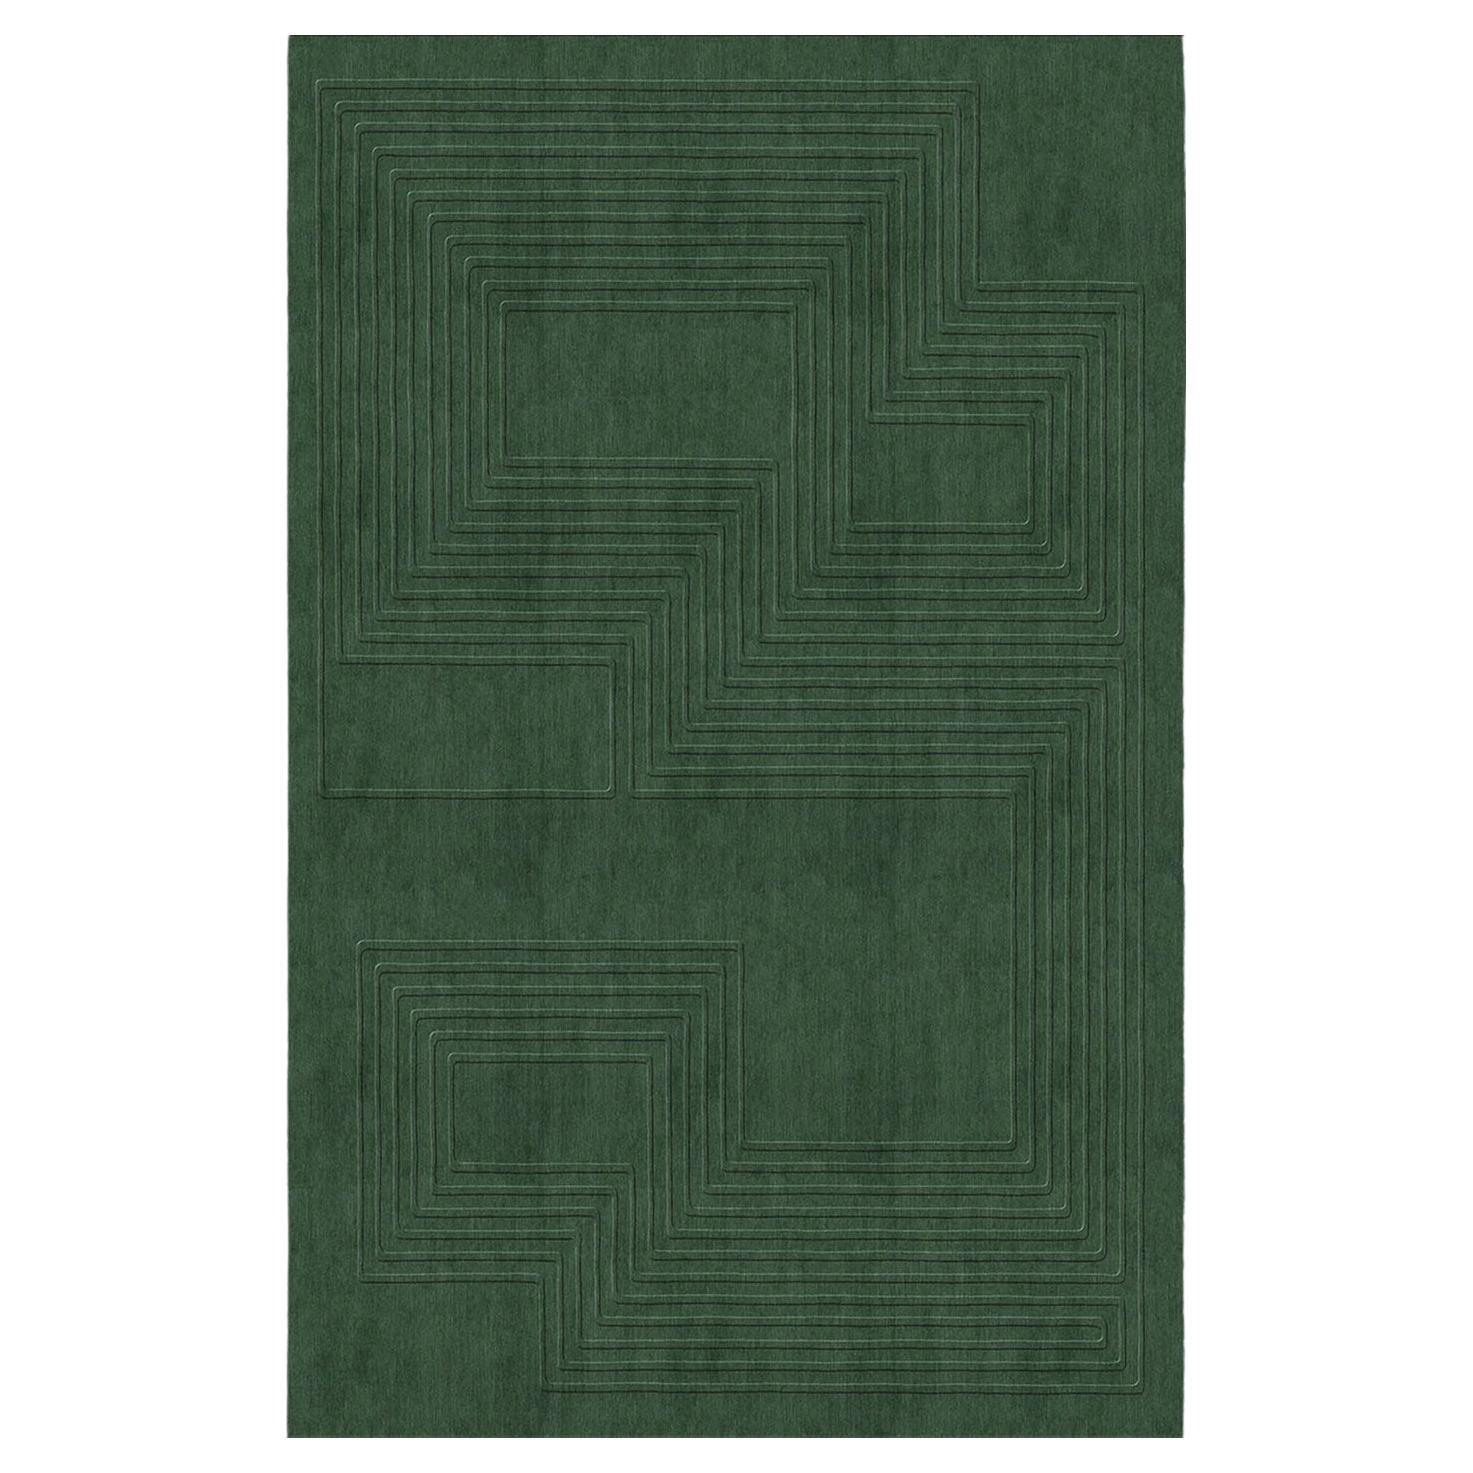 Maze Relief Rug Green, JT Pfeiffer, Represented by Tuleste Factory For Sale